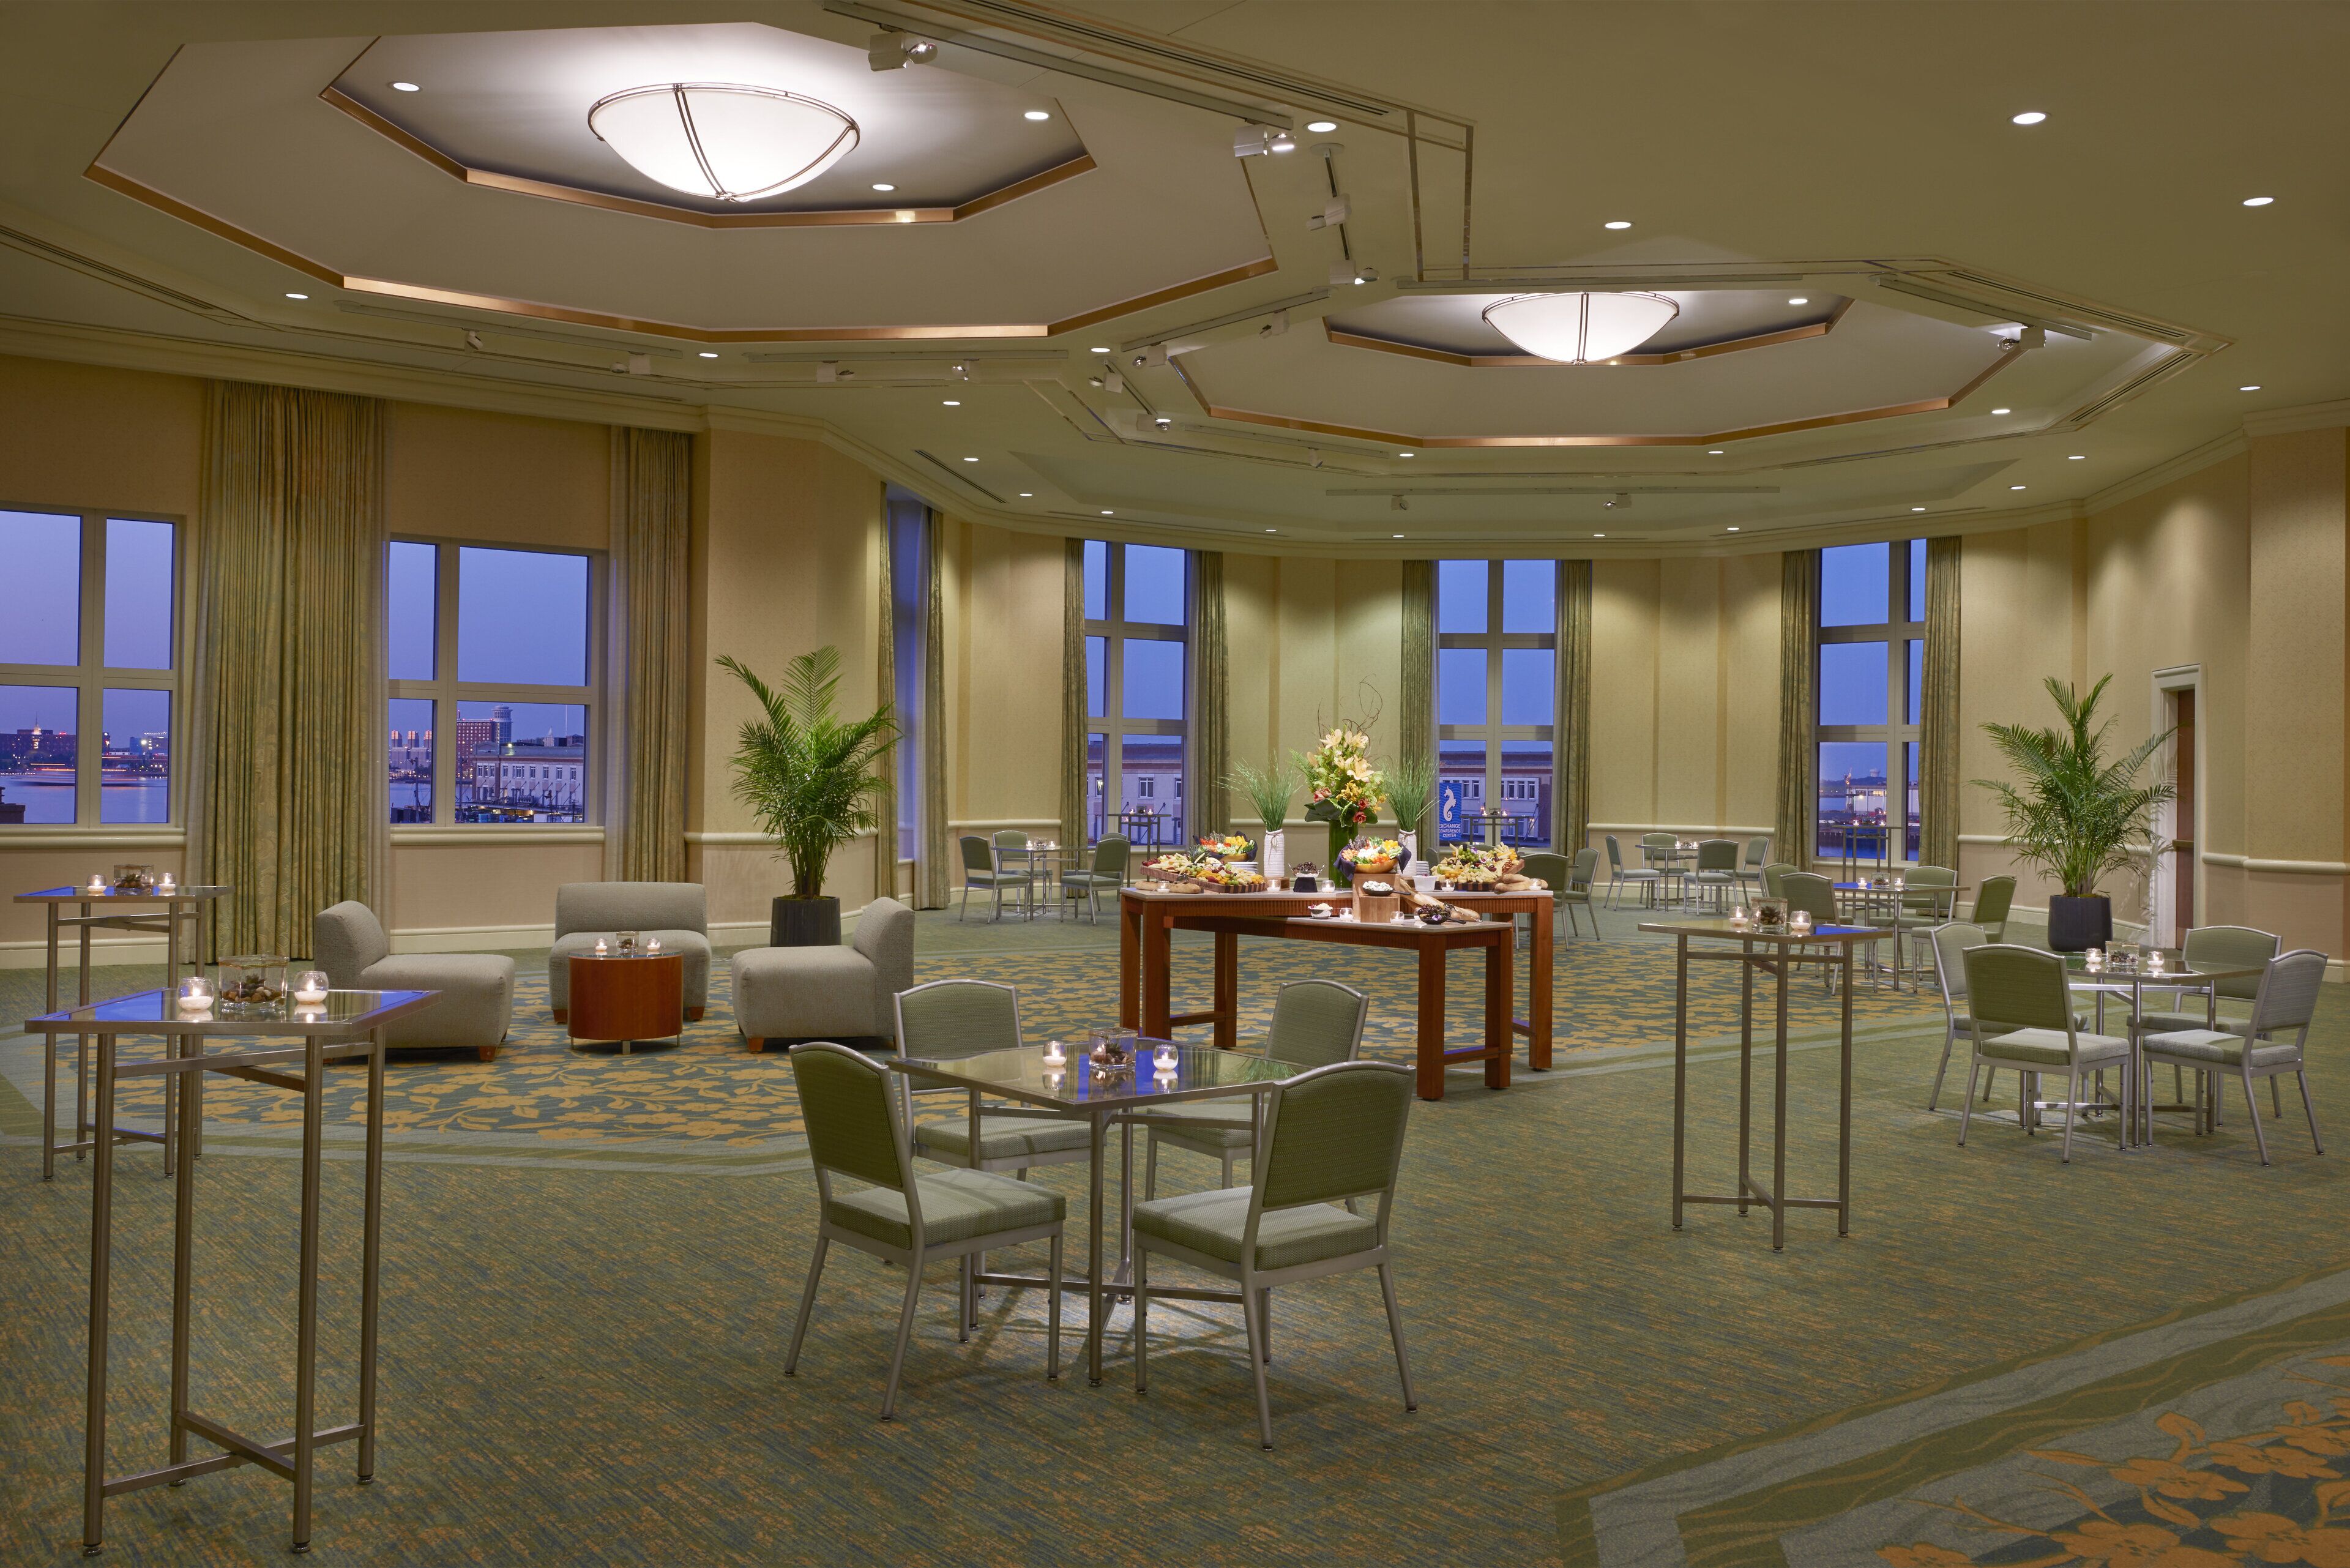 Banquet hall view of Seaport Hotel Boston